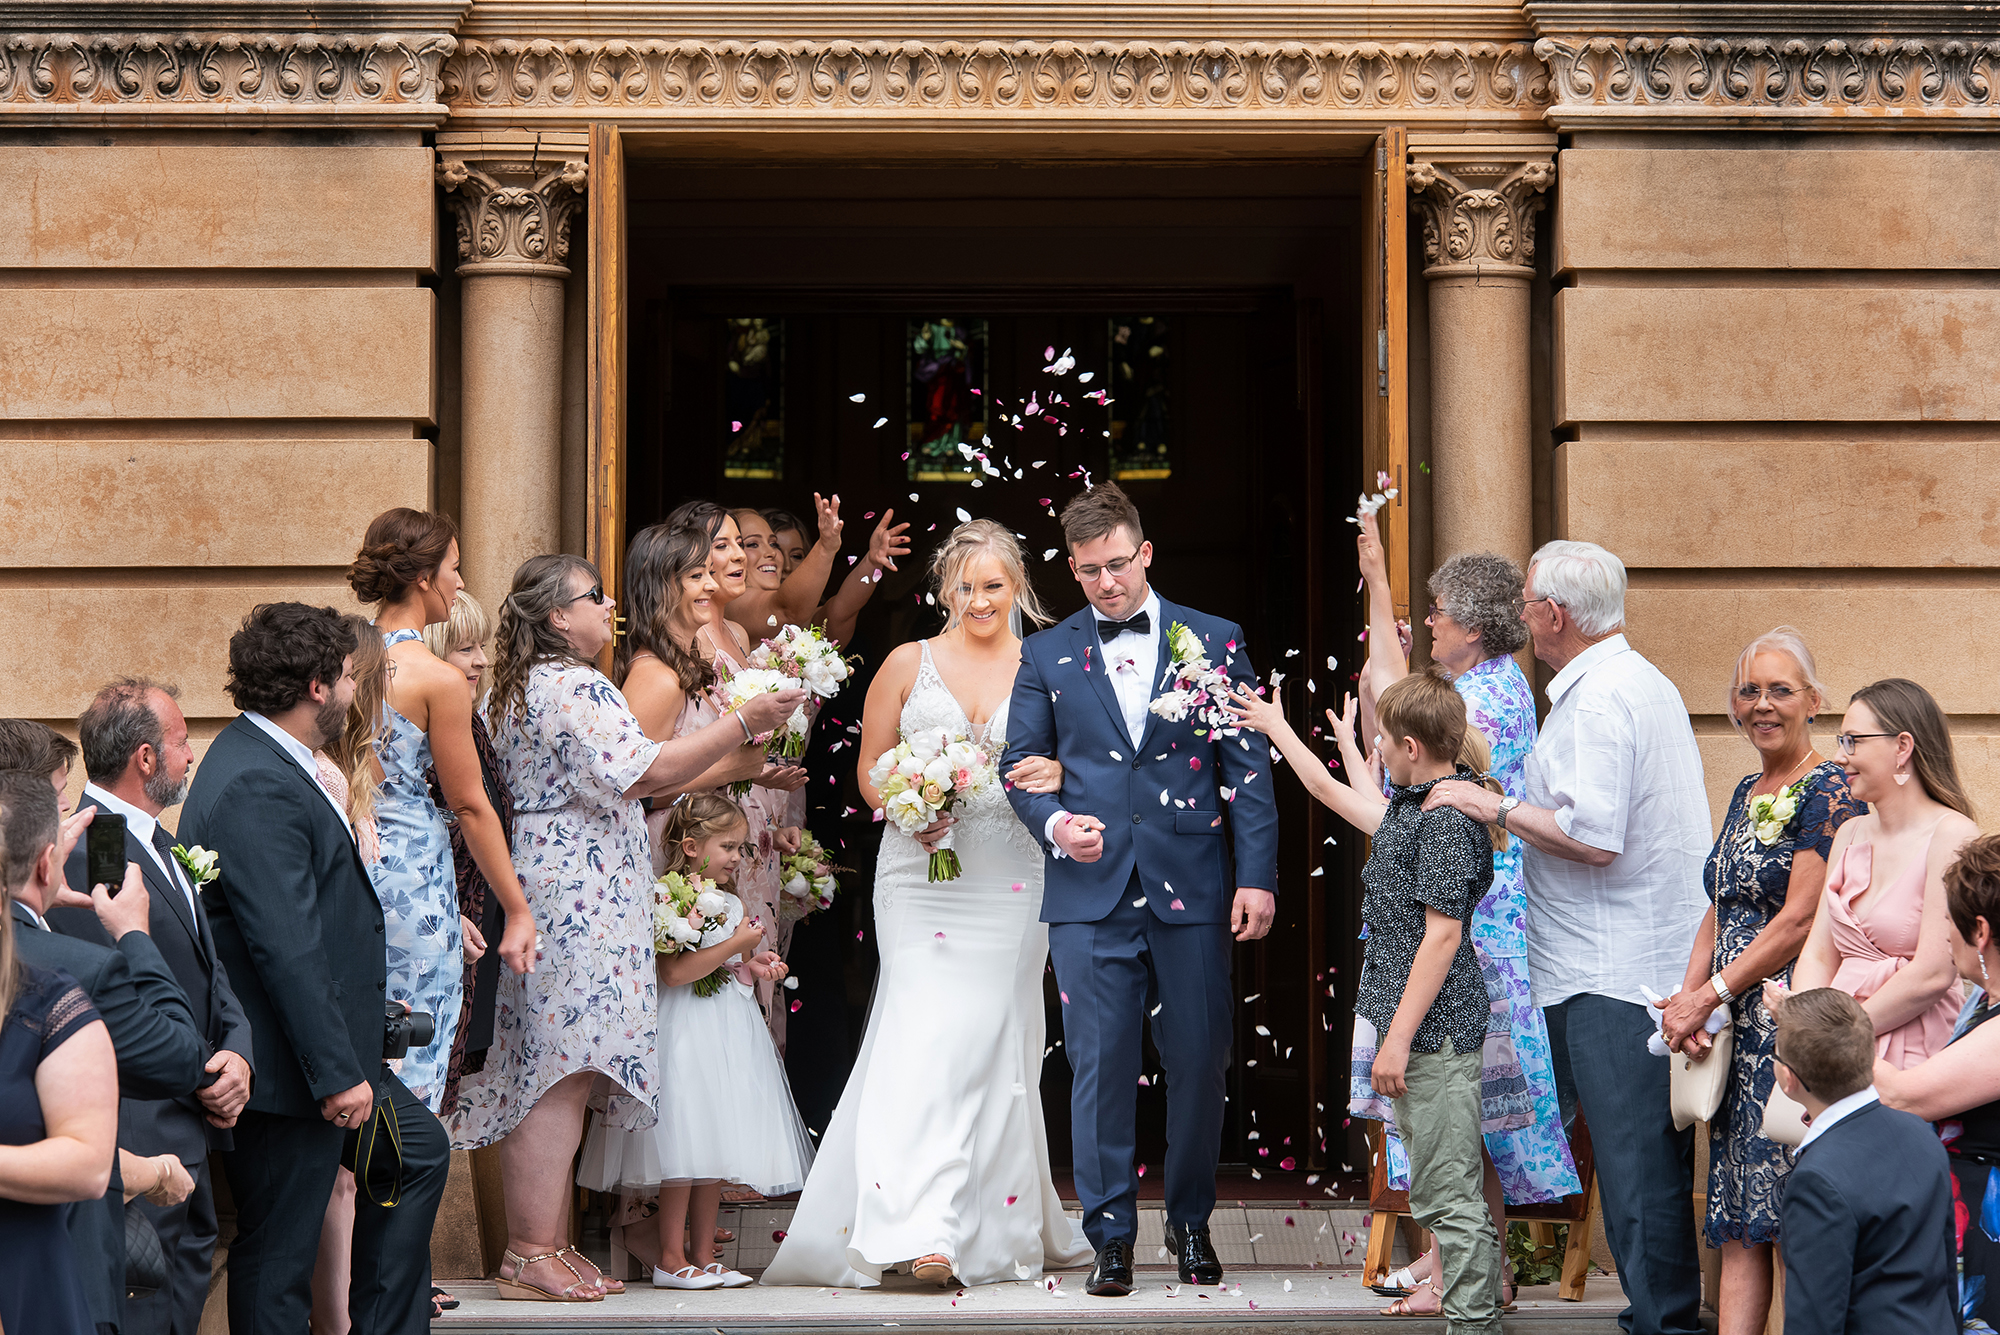 Couple walking out of the church with guests throwing confetti, Adelaide church wedding